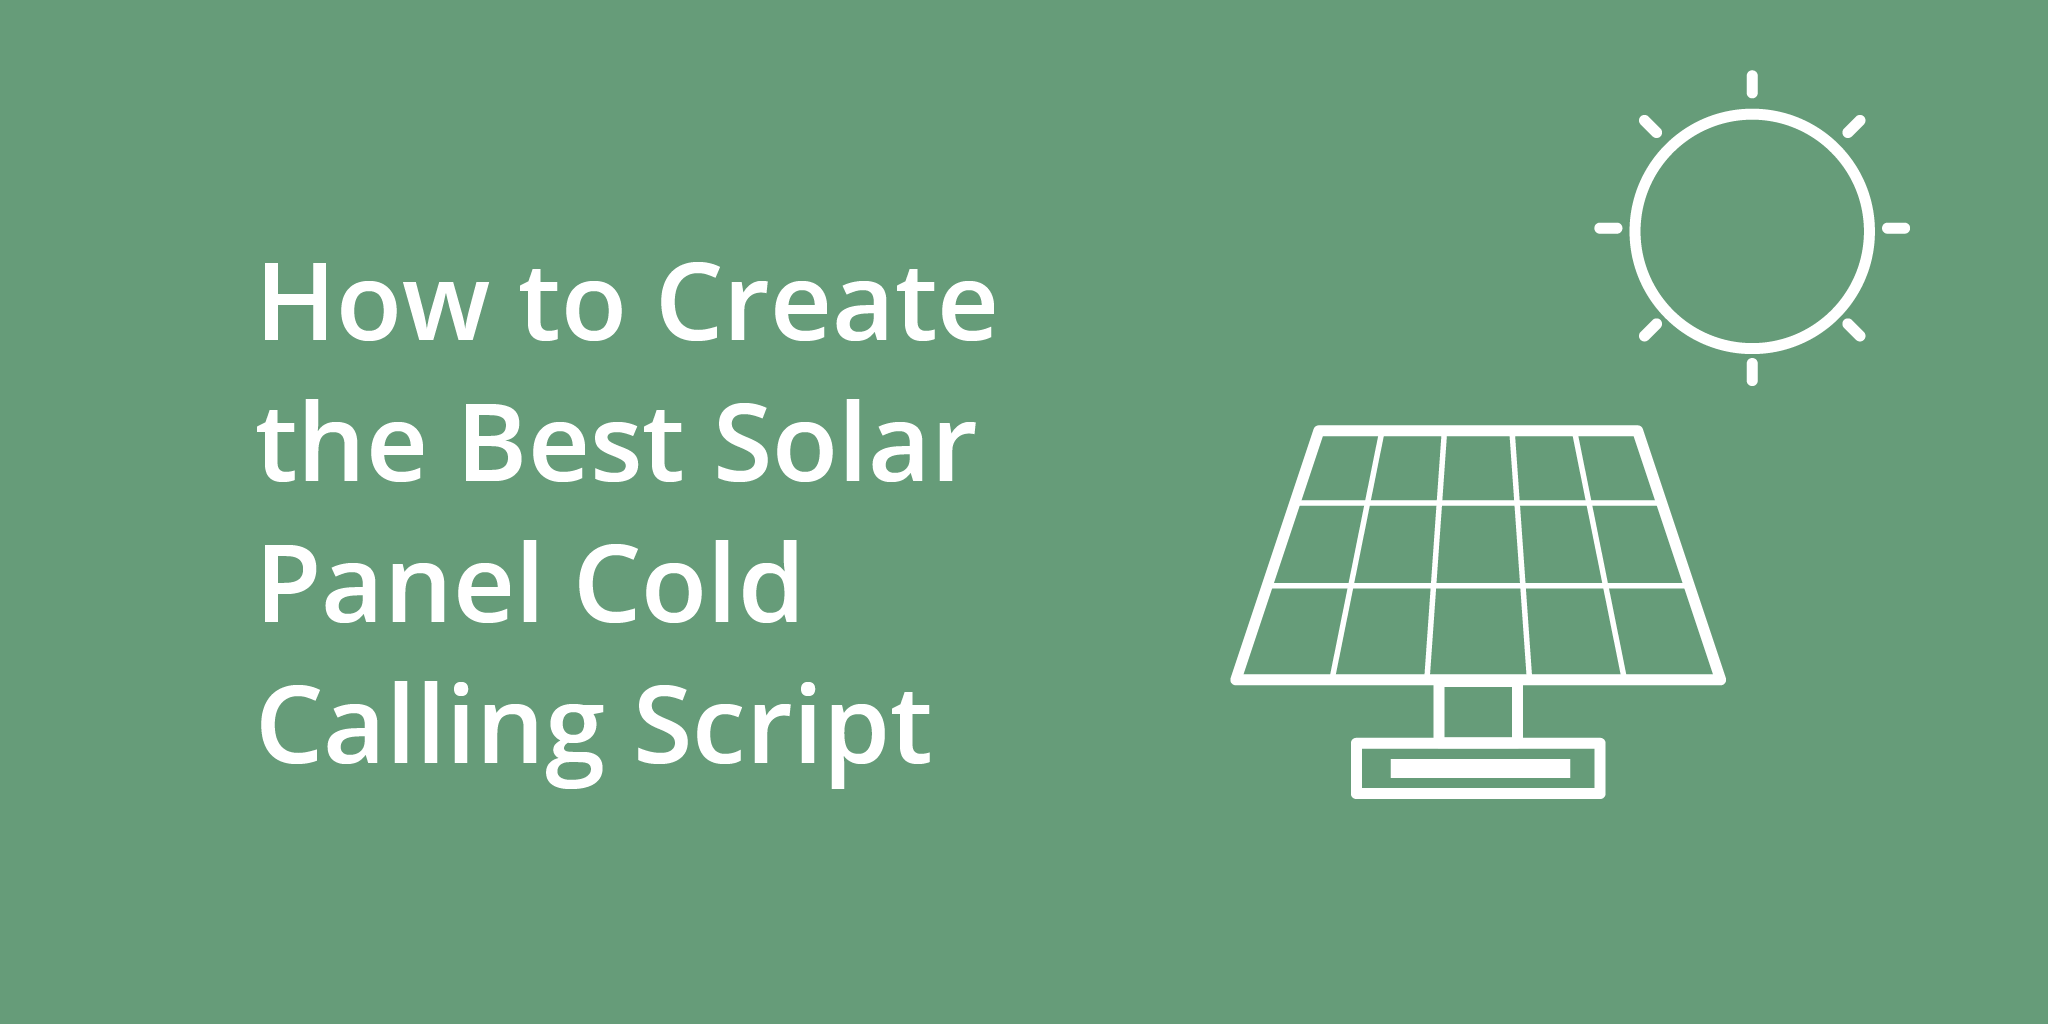 How to Create the Best Solar Panel Cold Calling Script | Telephones for business